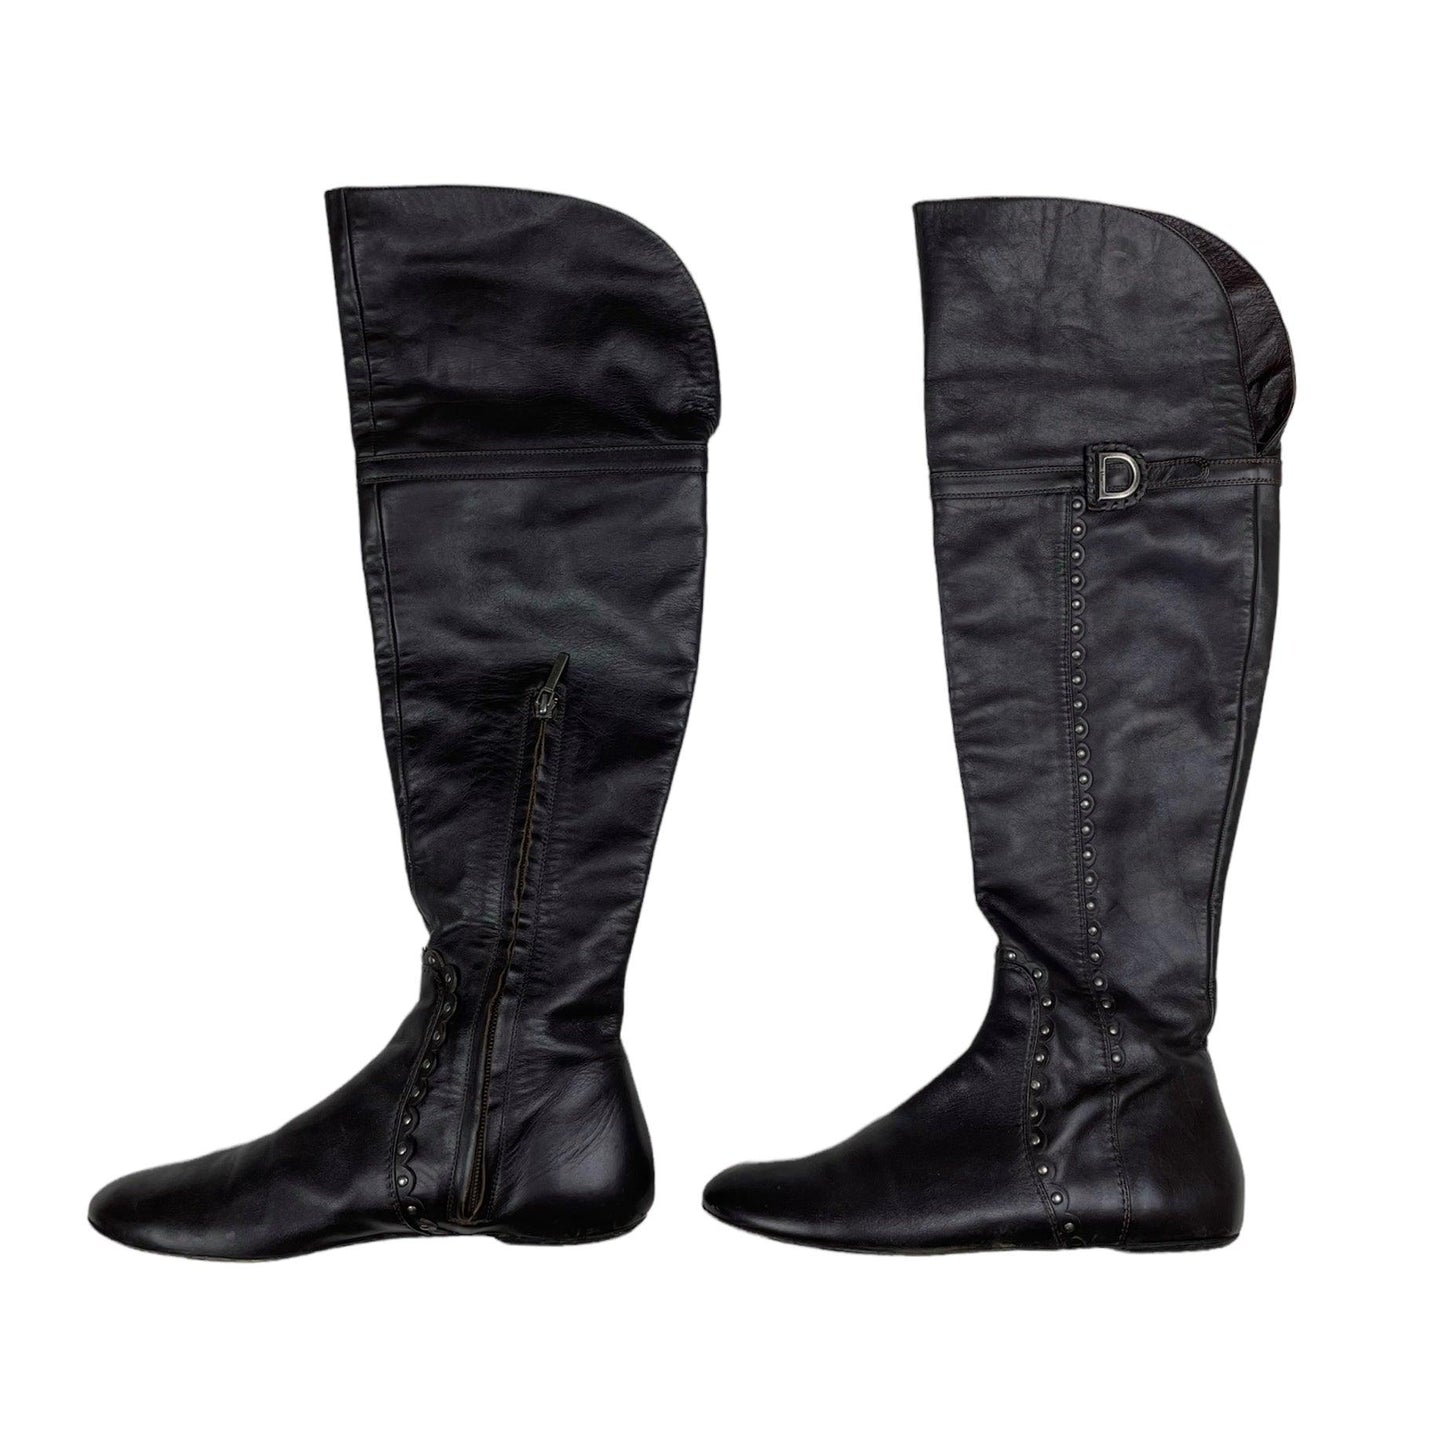 Christian Dior c.2005 over knee riding boots - Known Source